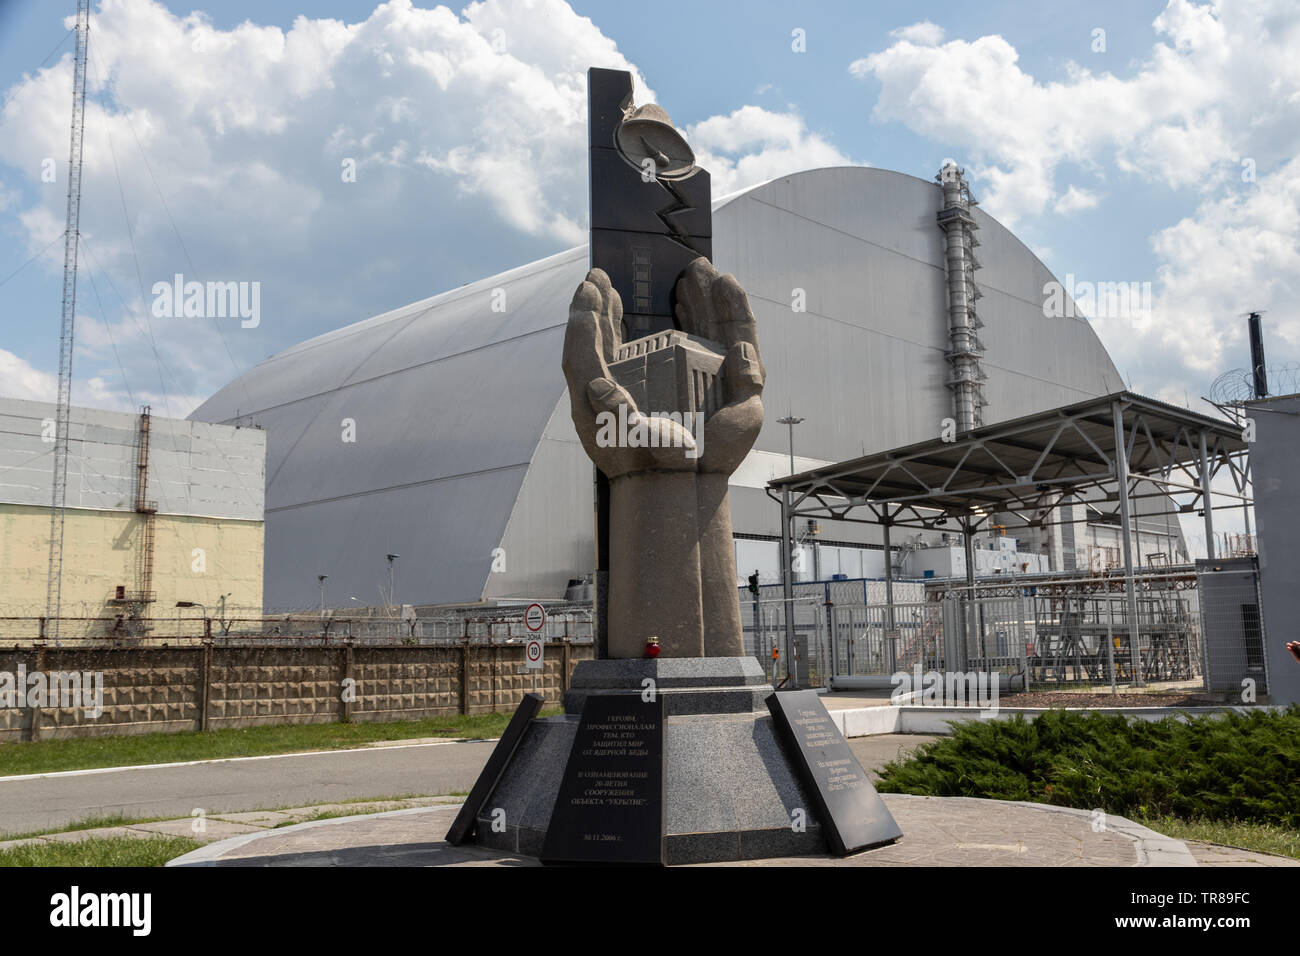 Monument to the Chernobyl Victims at Chernobyl Nuclear Power Plant, Reactor 4, Chernobyl exclusion zone, Ukraine Stock Photo